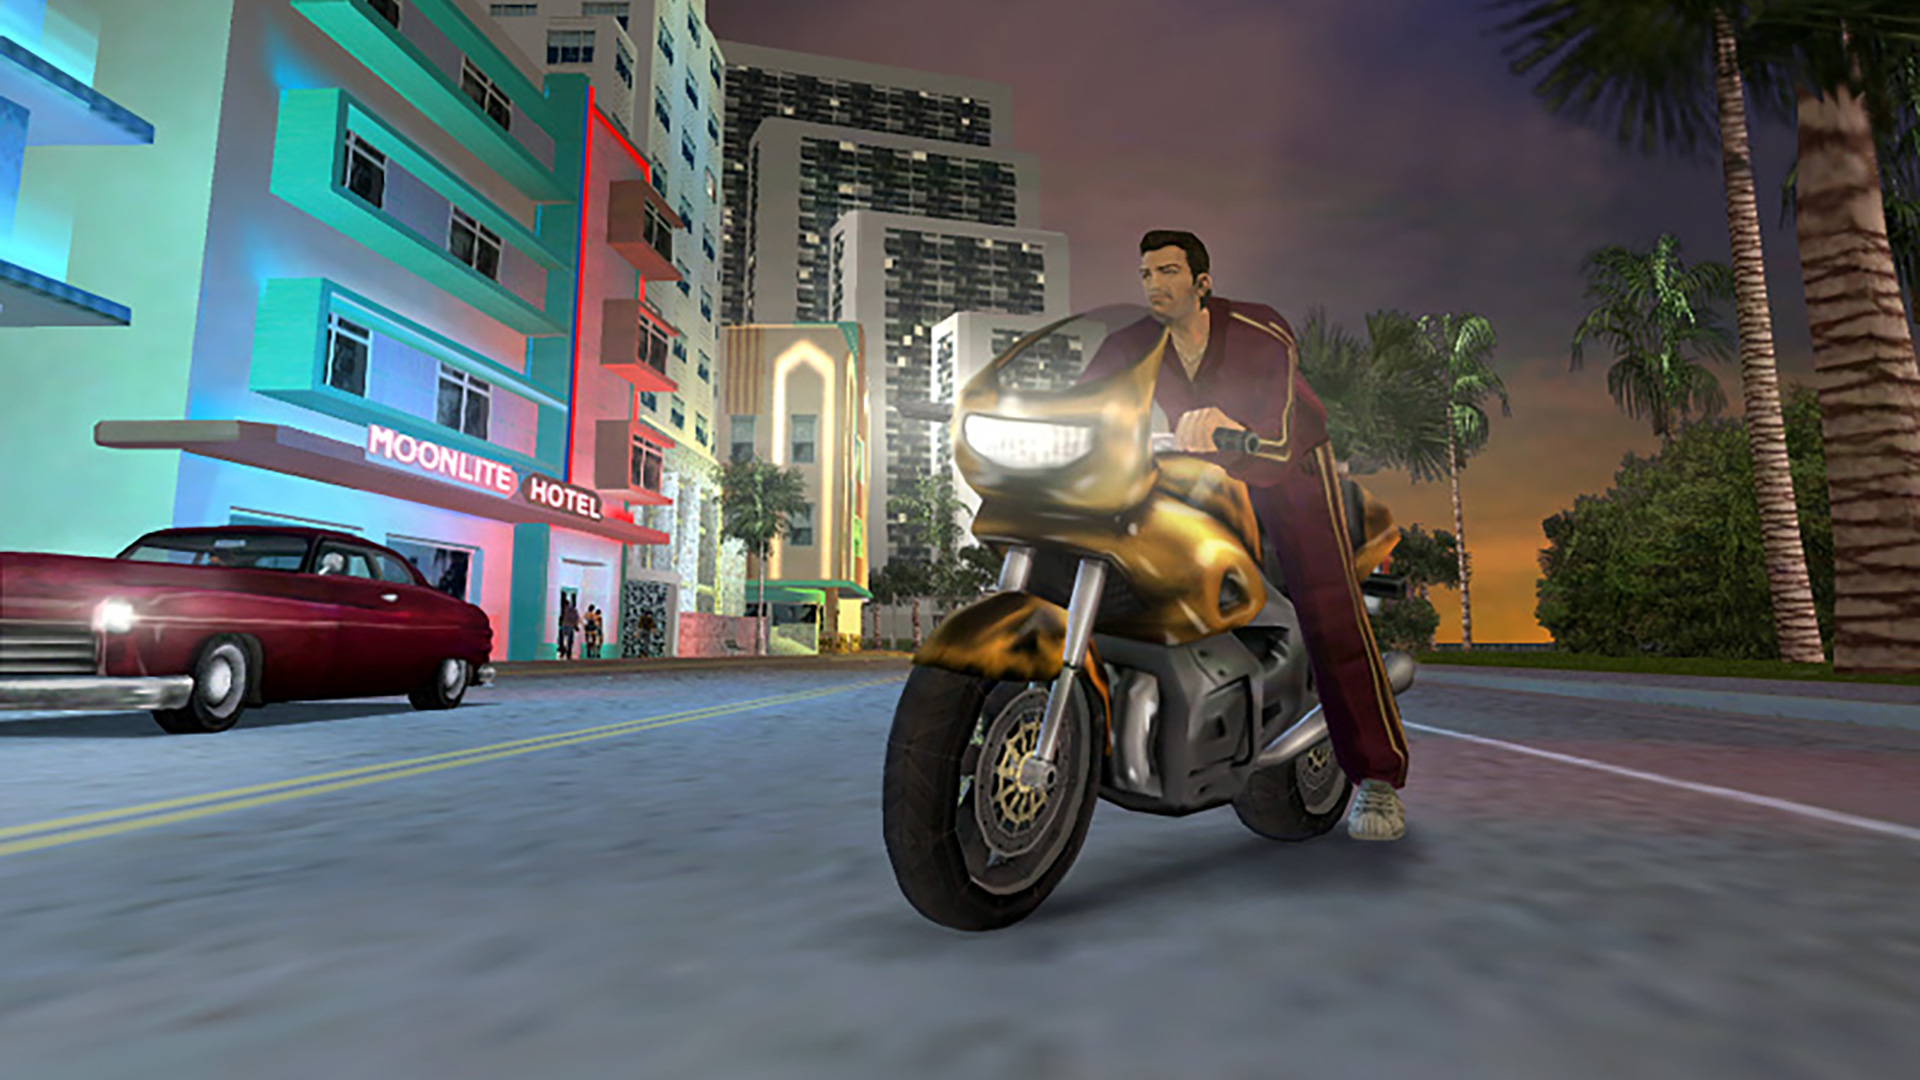 Screenshot from GTA Vice City featuring an apartment in the background